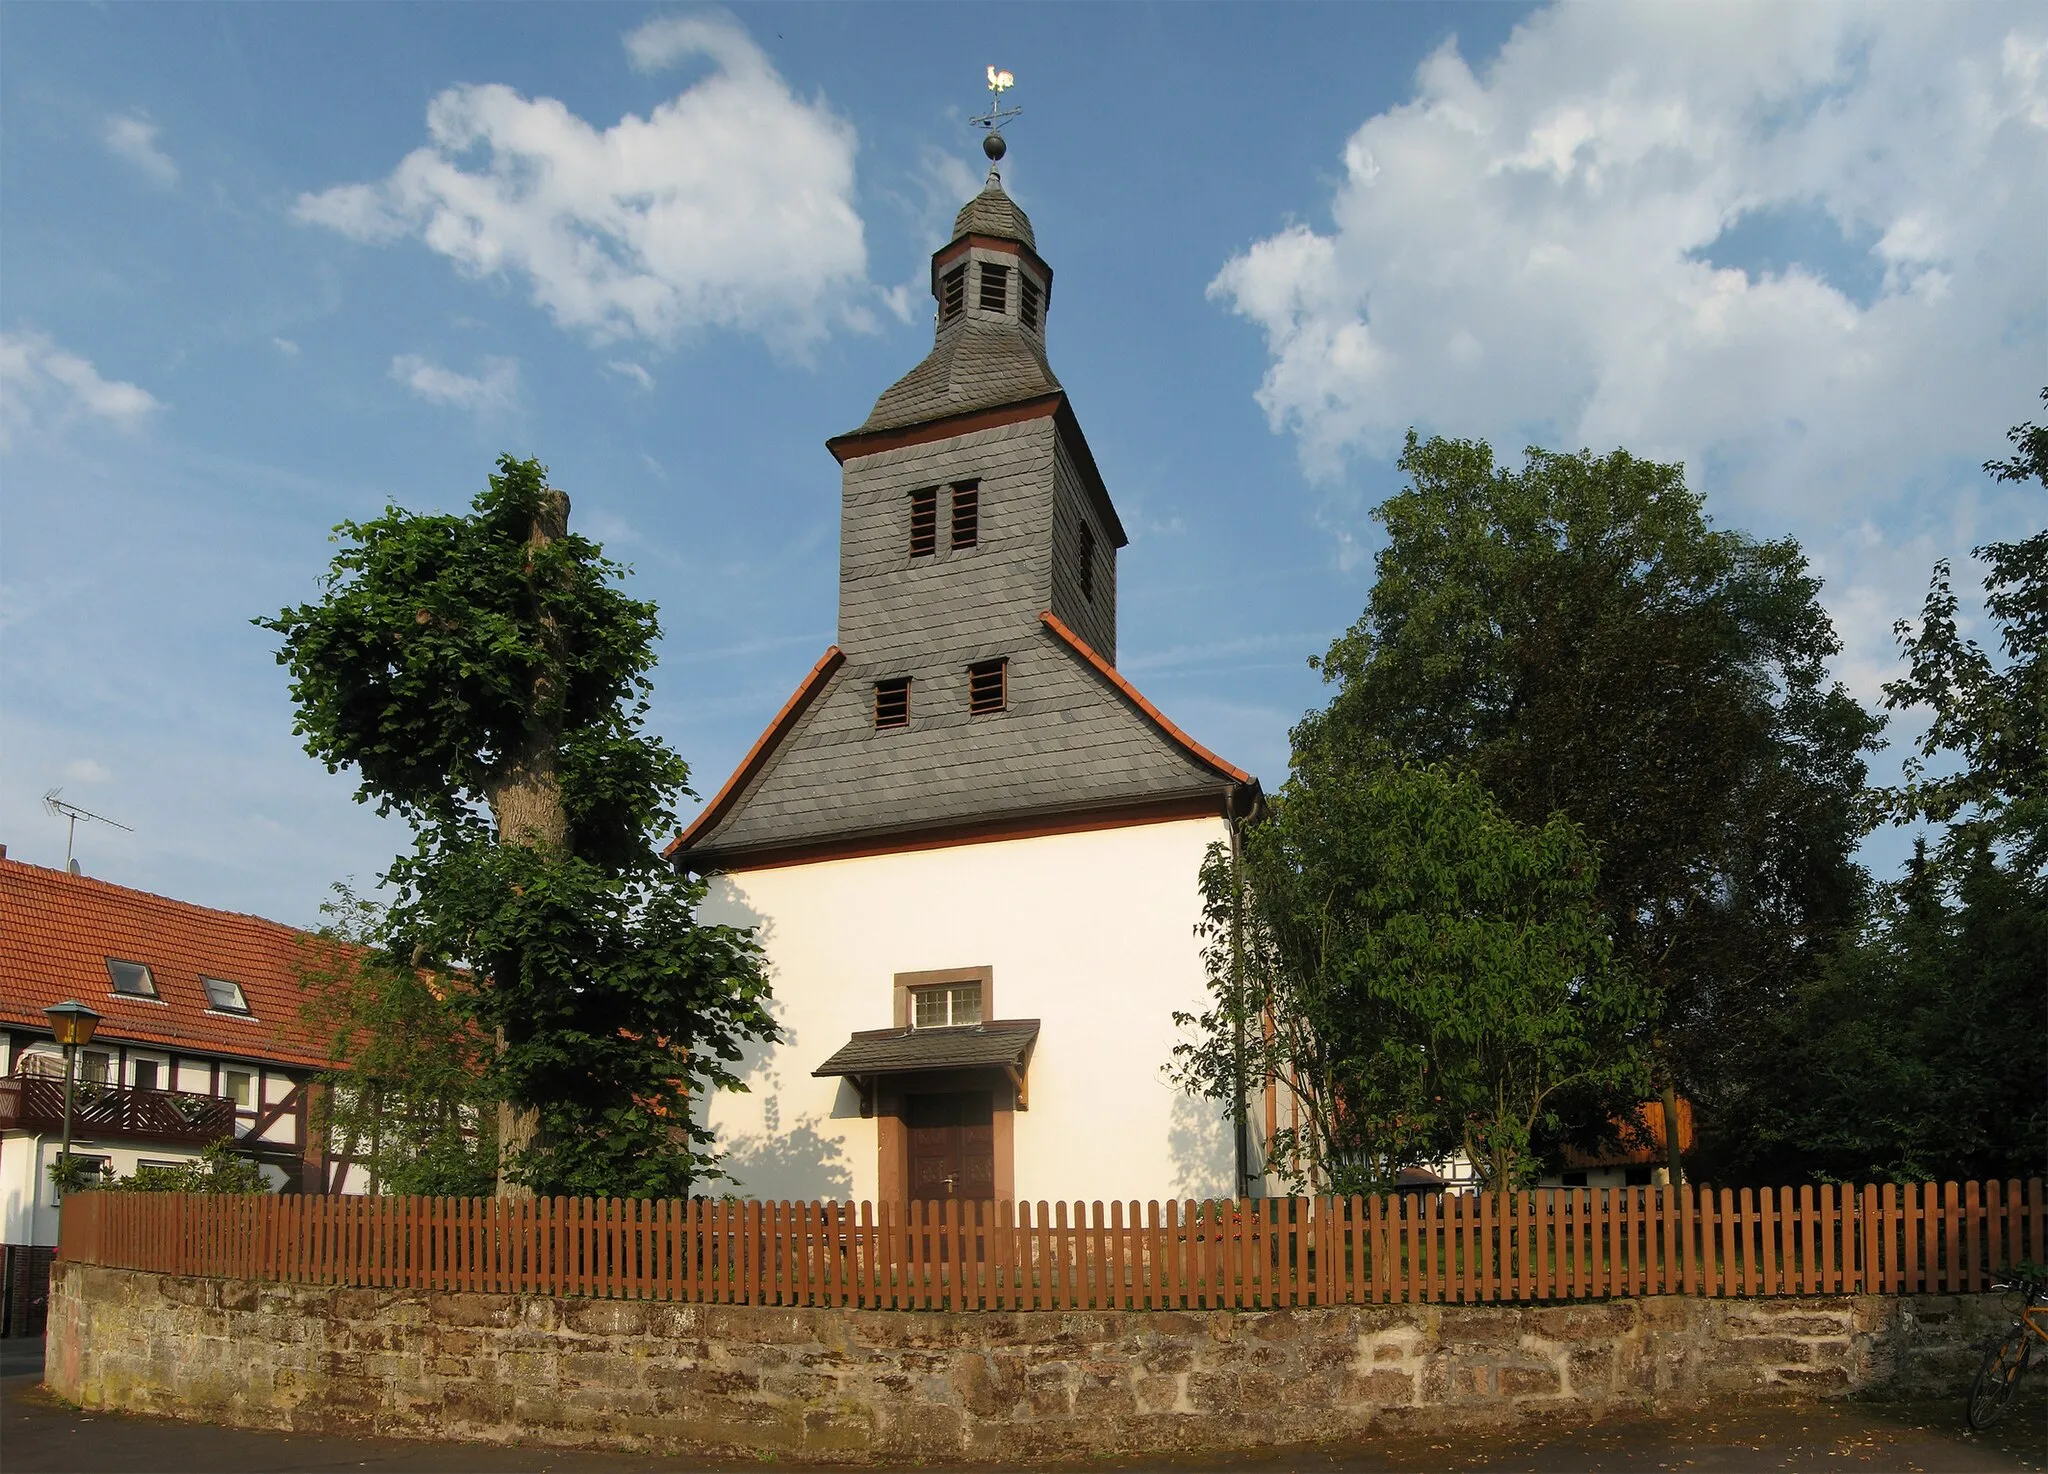 Photo showing: The church of Hatzbach a village in the area of Stadallendorf